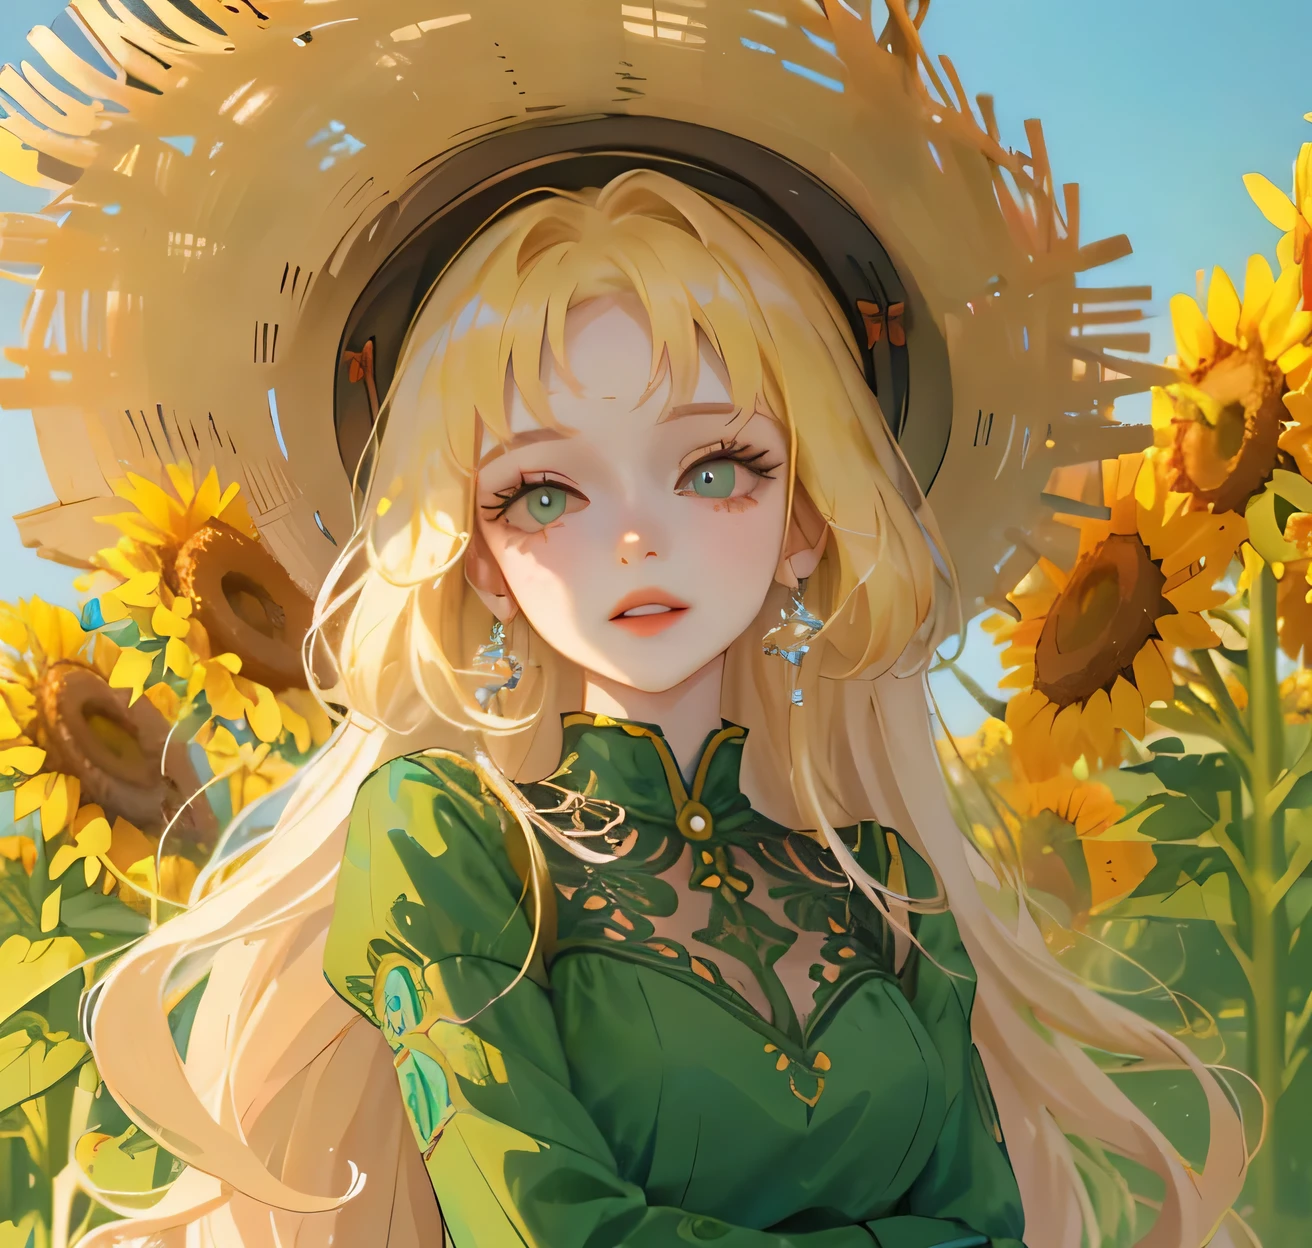 (high quality) (best quality) (a woman) (correct physiognomy) (perfect eyes) (perfect pupils) Woman, blonde hair with bangs on her forehead, gardener's hat on her head, green eyes, perfect eyes, tender lips, middle age, olive green summer dress with flower print, location of the photo the woman must be in the middle of a field of sunflowers, lighting of the photo sunlight, full body proportion from head to hips.